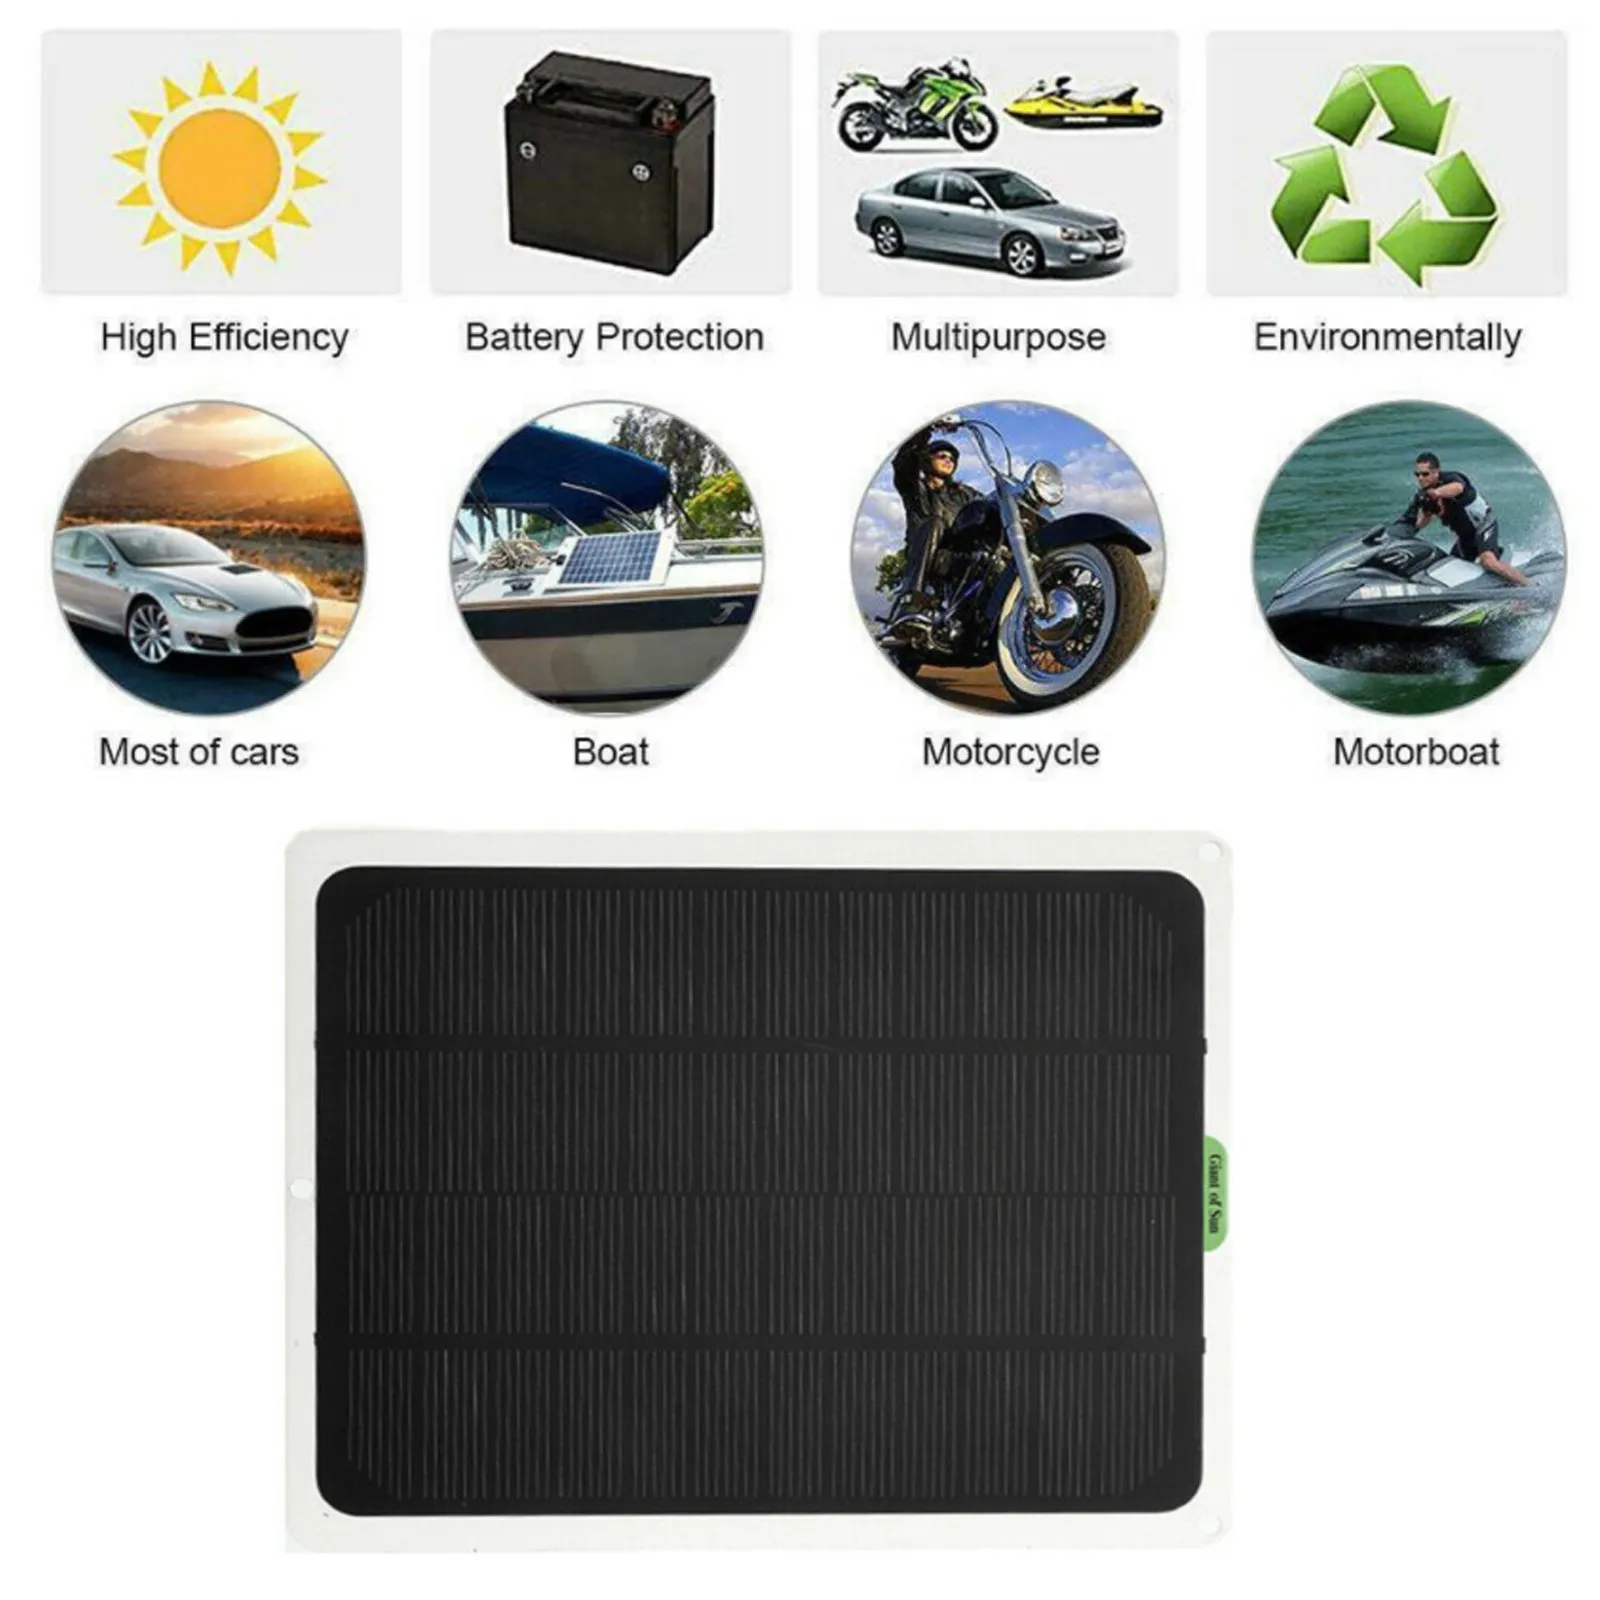 

USB DC 5V 12V 22W Portable MPPT Solar Panel Trickle Charger Battery Charger Kit Maintainer Boat RV Car 600MA Black 1.51-2 A